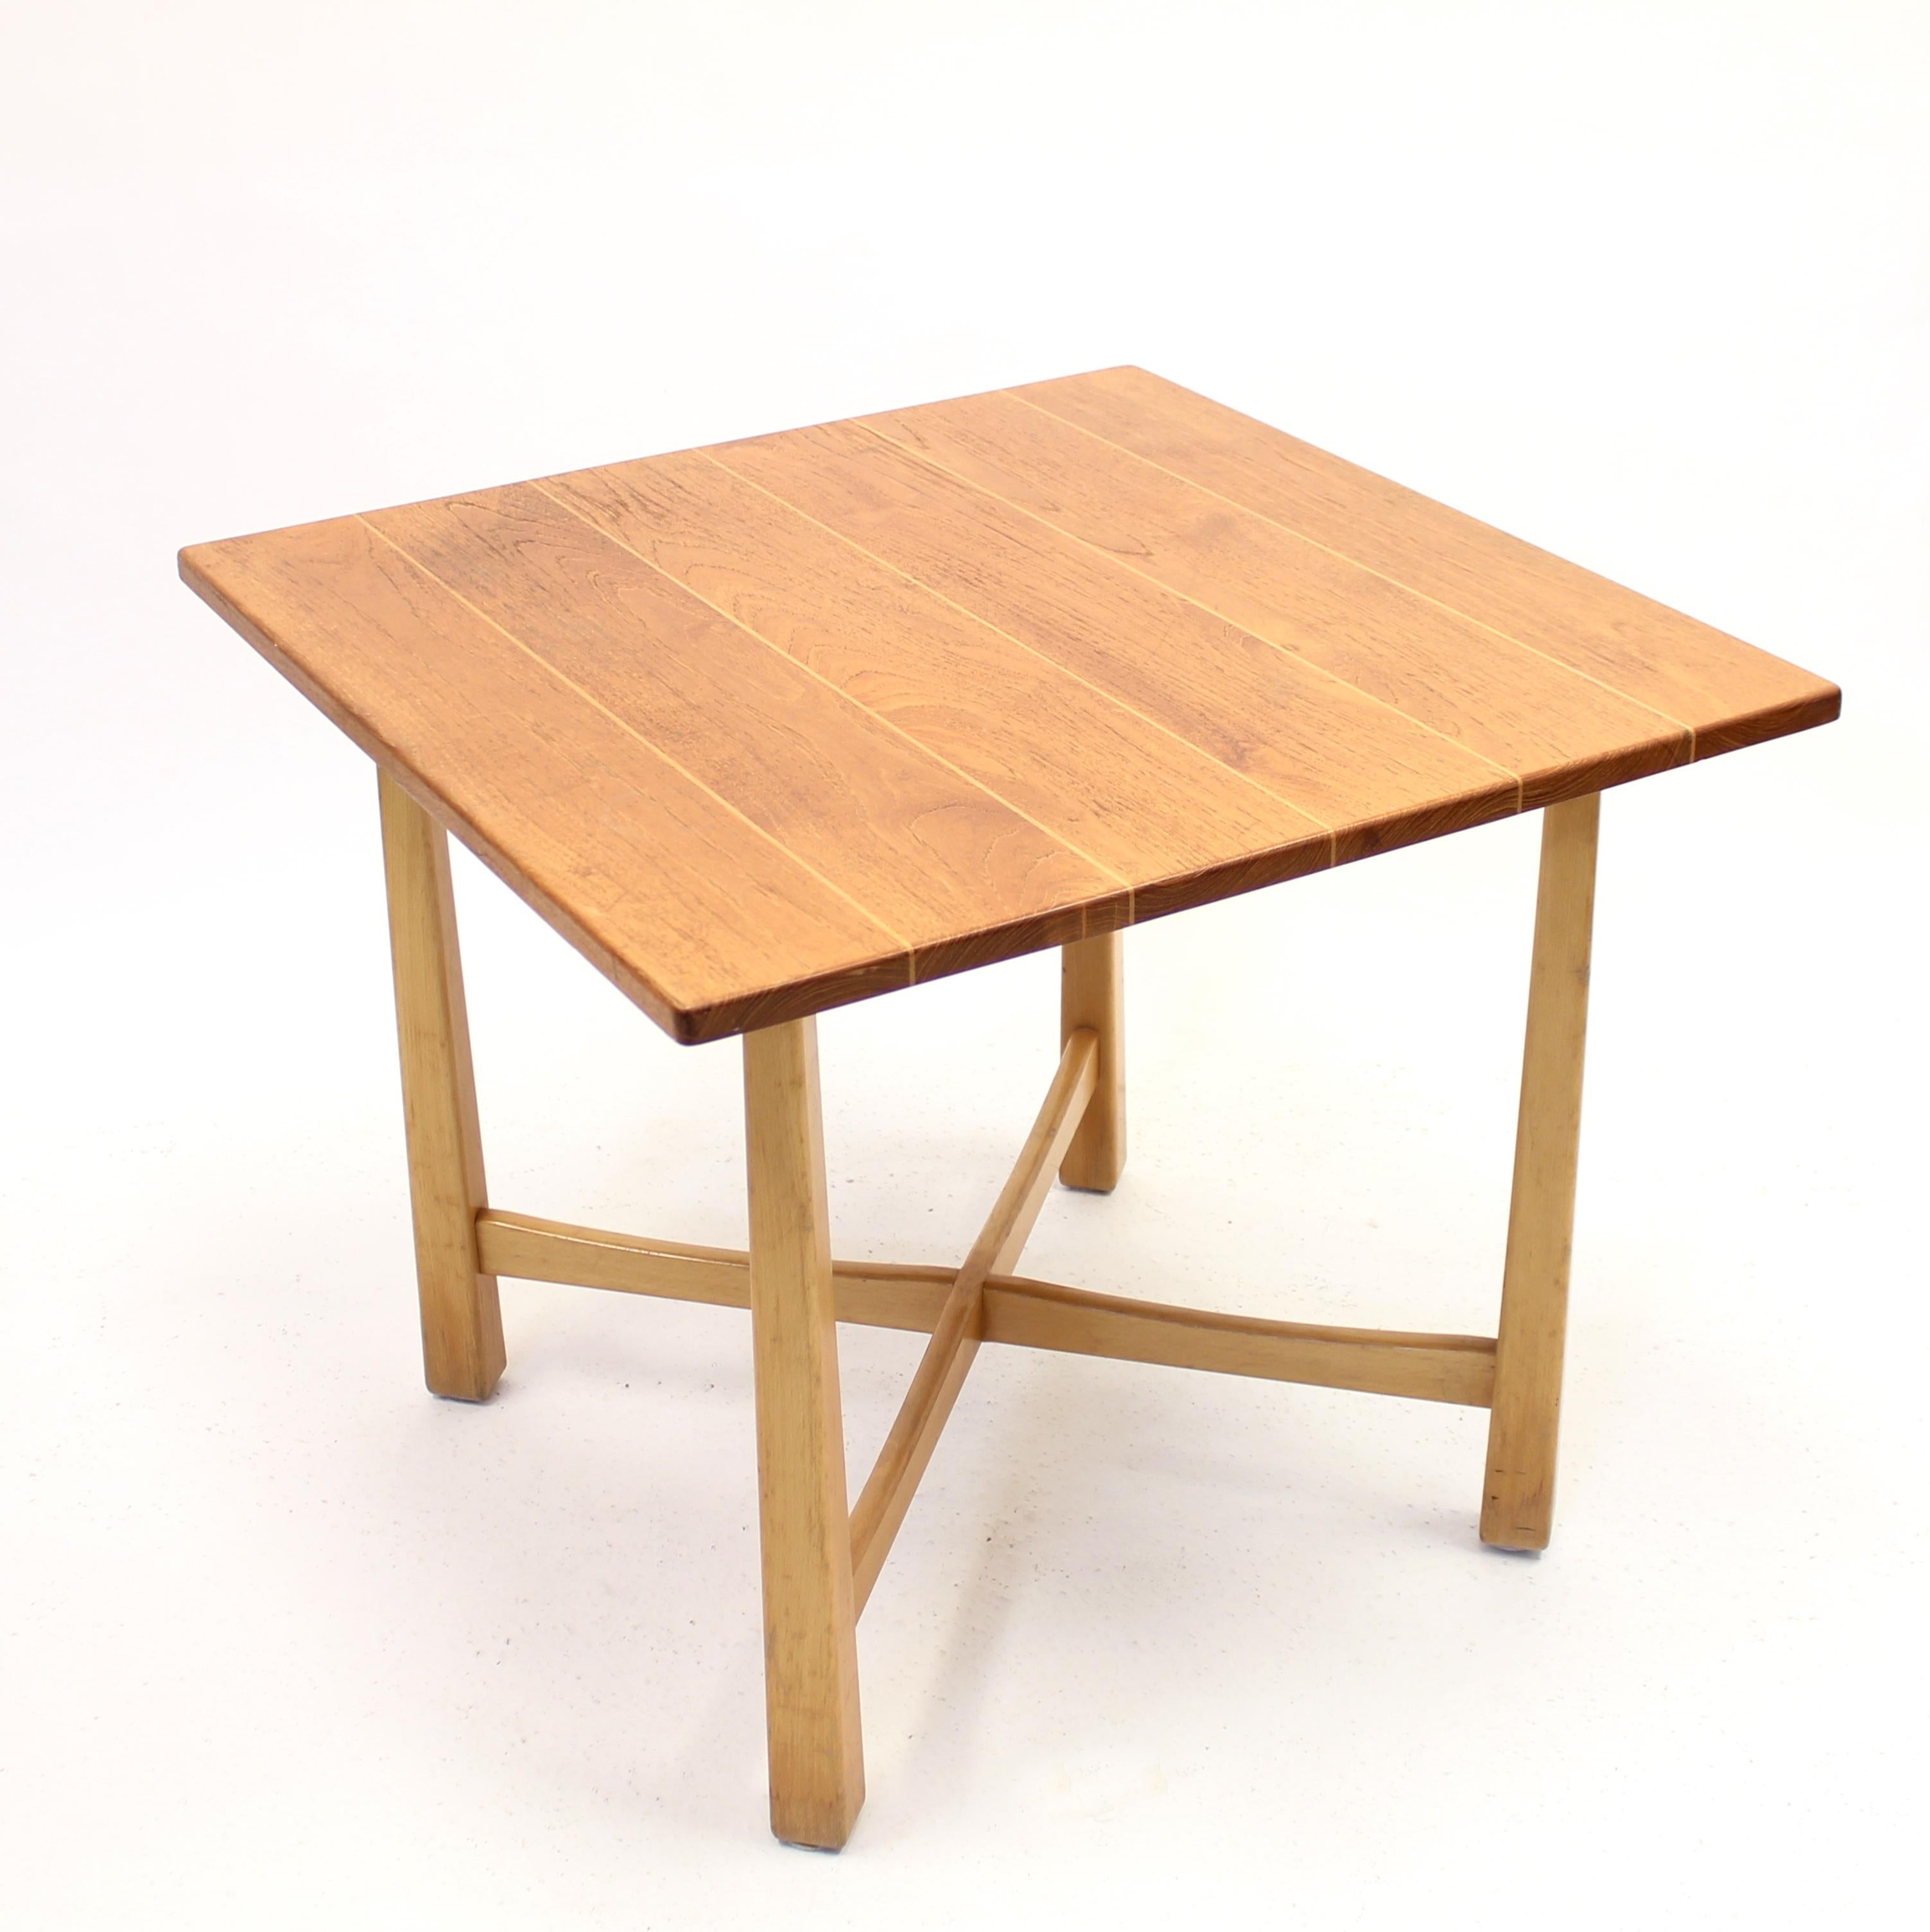 Swedish Modern Teak and Birch Table, Mid-20th Century In Good Condition For Sale In Uppsala, SE